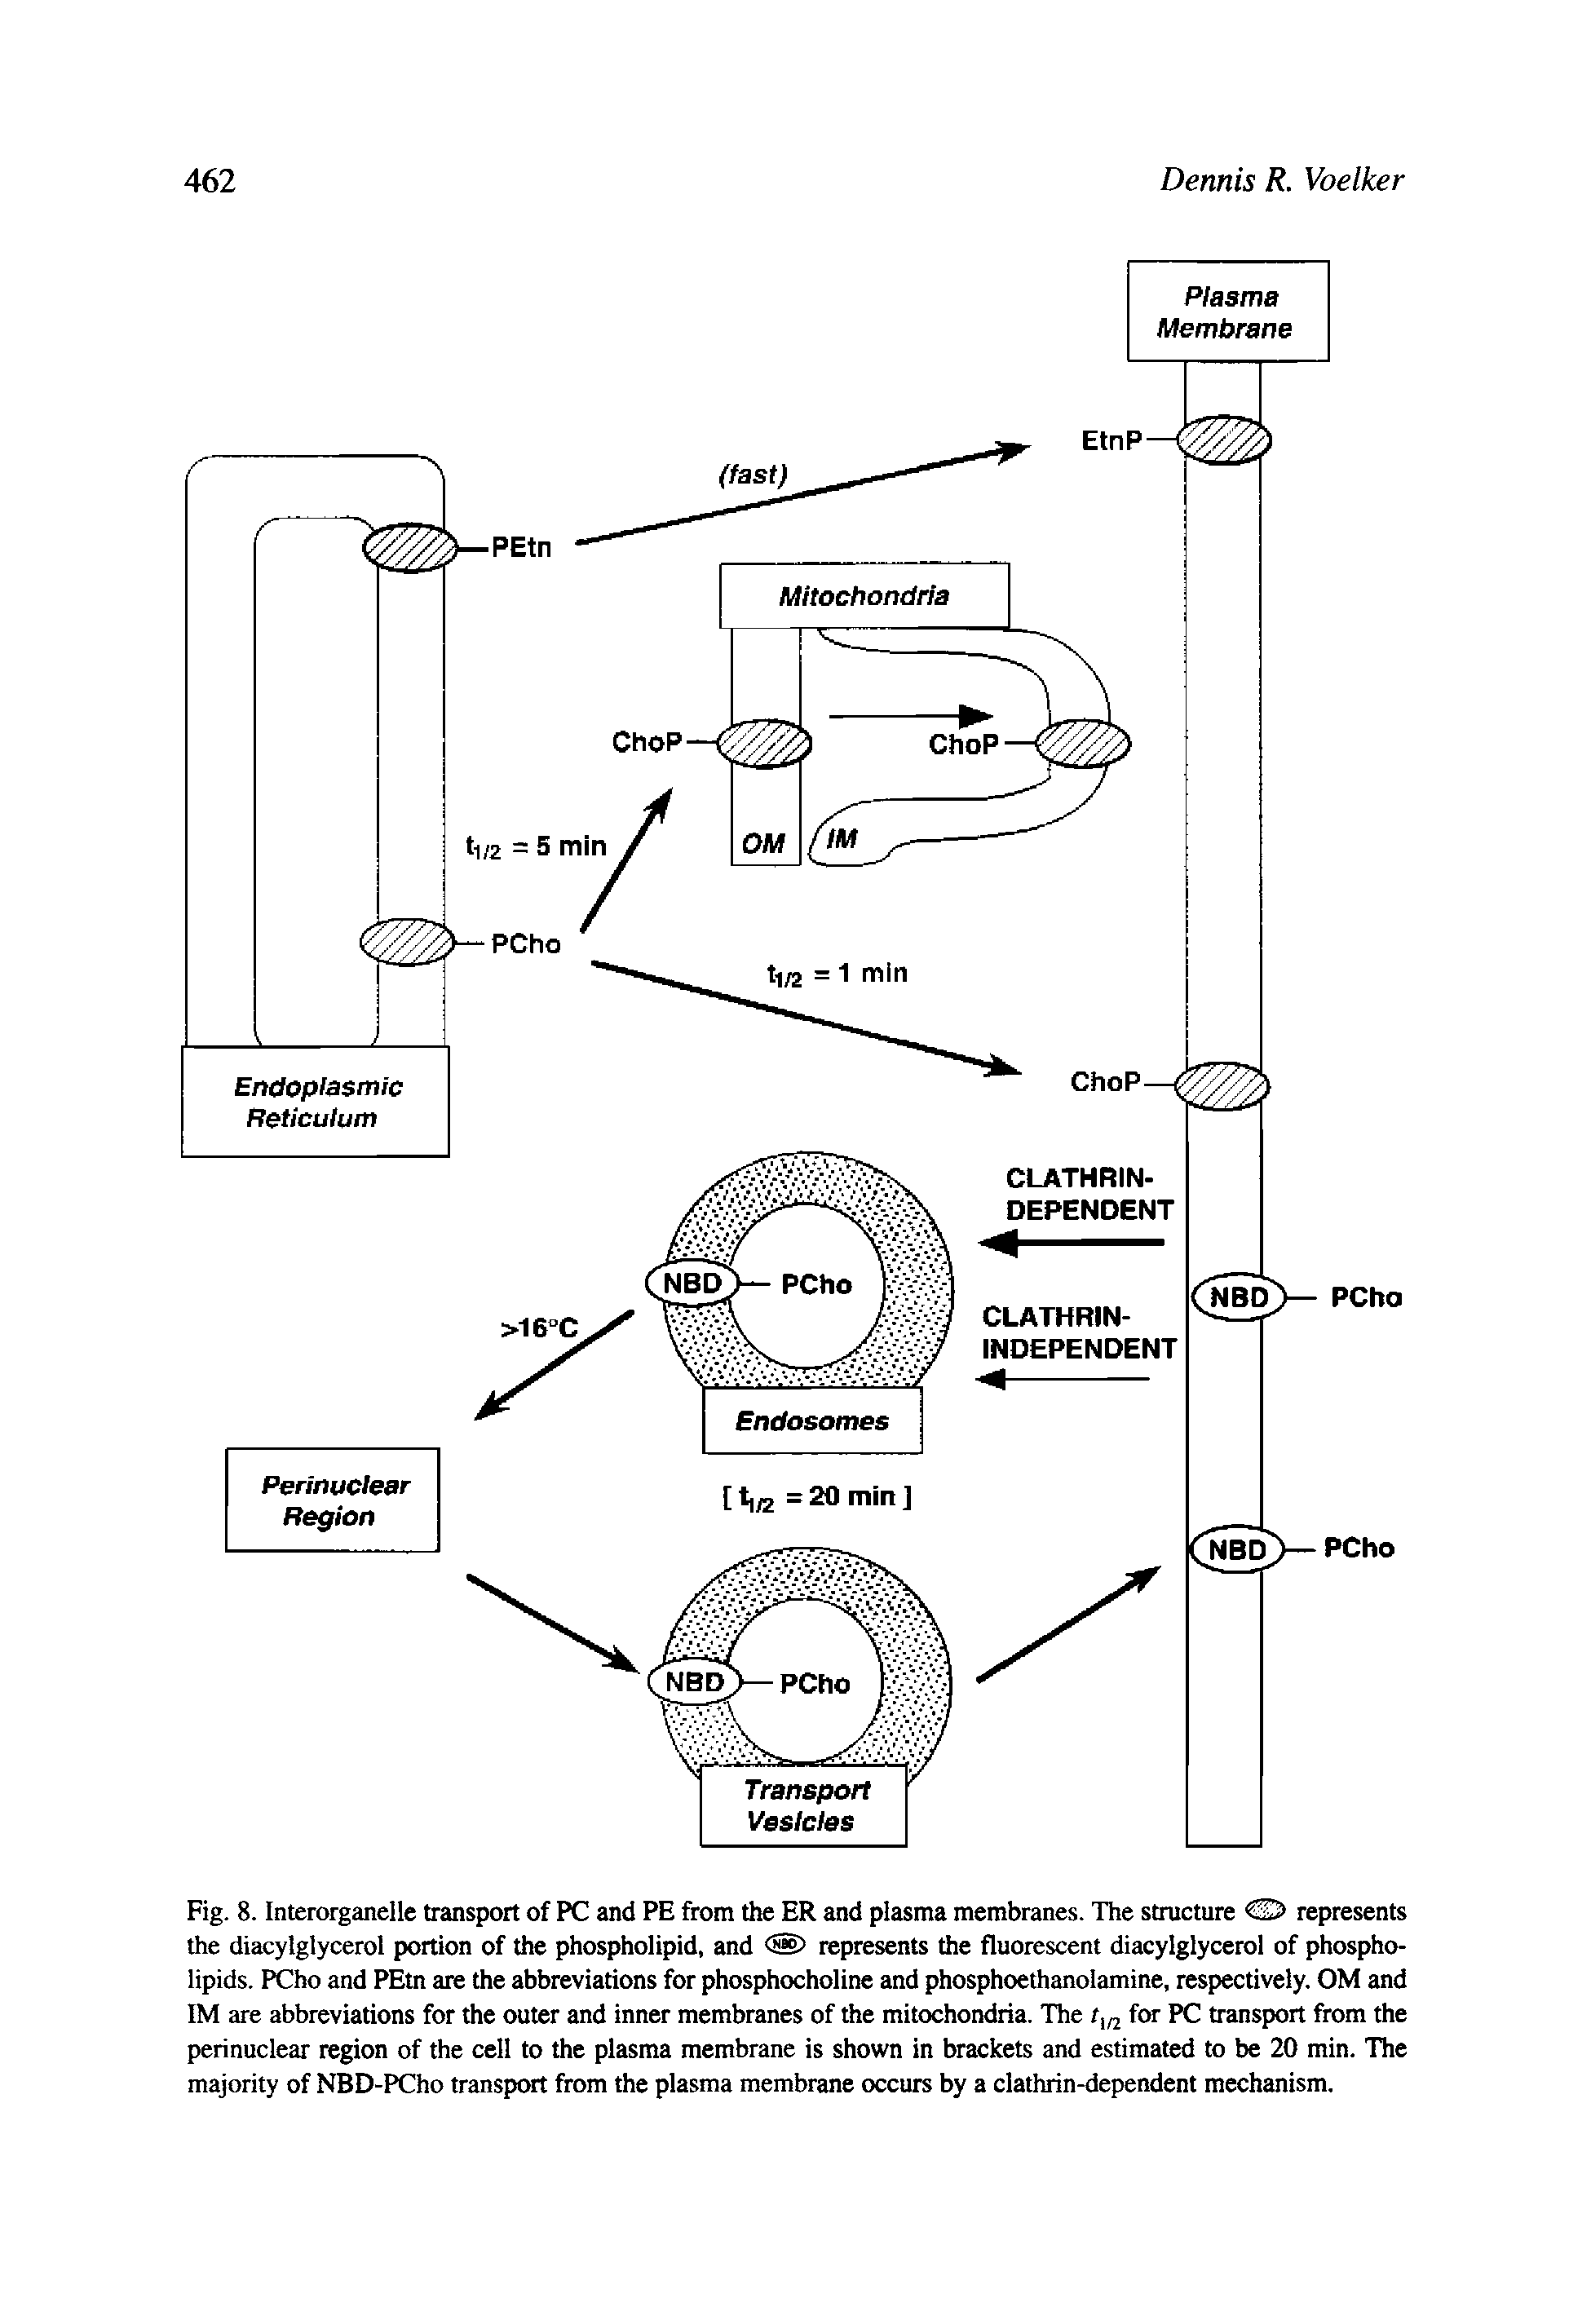 Fig. 8. Interorganelle transport of PC and PE from the ER and plasma membranes. The structure S> represents the diacylglycerol portion of the phospholipid, and represents the fluorescent diacylglycerol of phospholipids. PCho and PEtn are the abbreviations for phosphocholine and phosphoethanolamine, respectively. OM and IM are abbreviations for the outer and inner membranes of the mitochondria. The for PC transport from the perinuclear region of the cell to the plasma membrane is shown in brackets and estimated to be 20 min. The majority of NBD-PCho transport from the plasma membrane occurs by a clathrin-dependent mechanism.